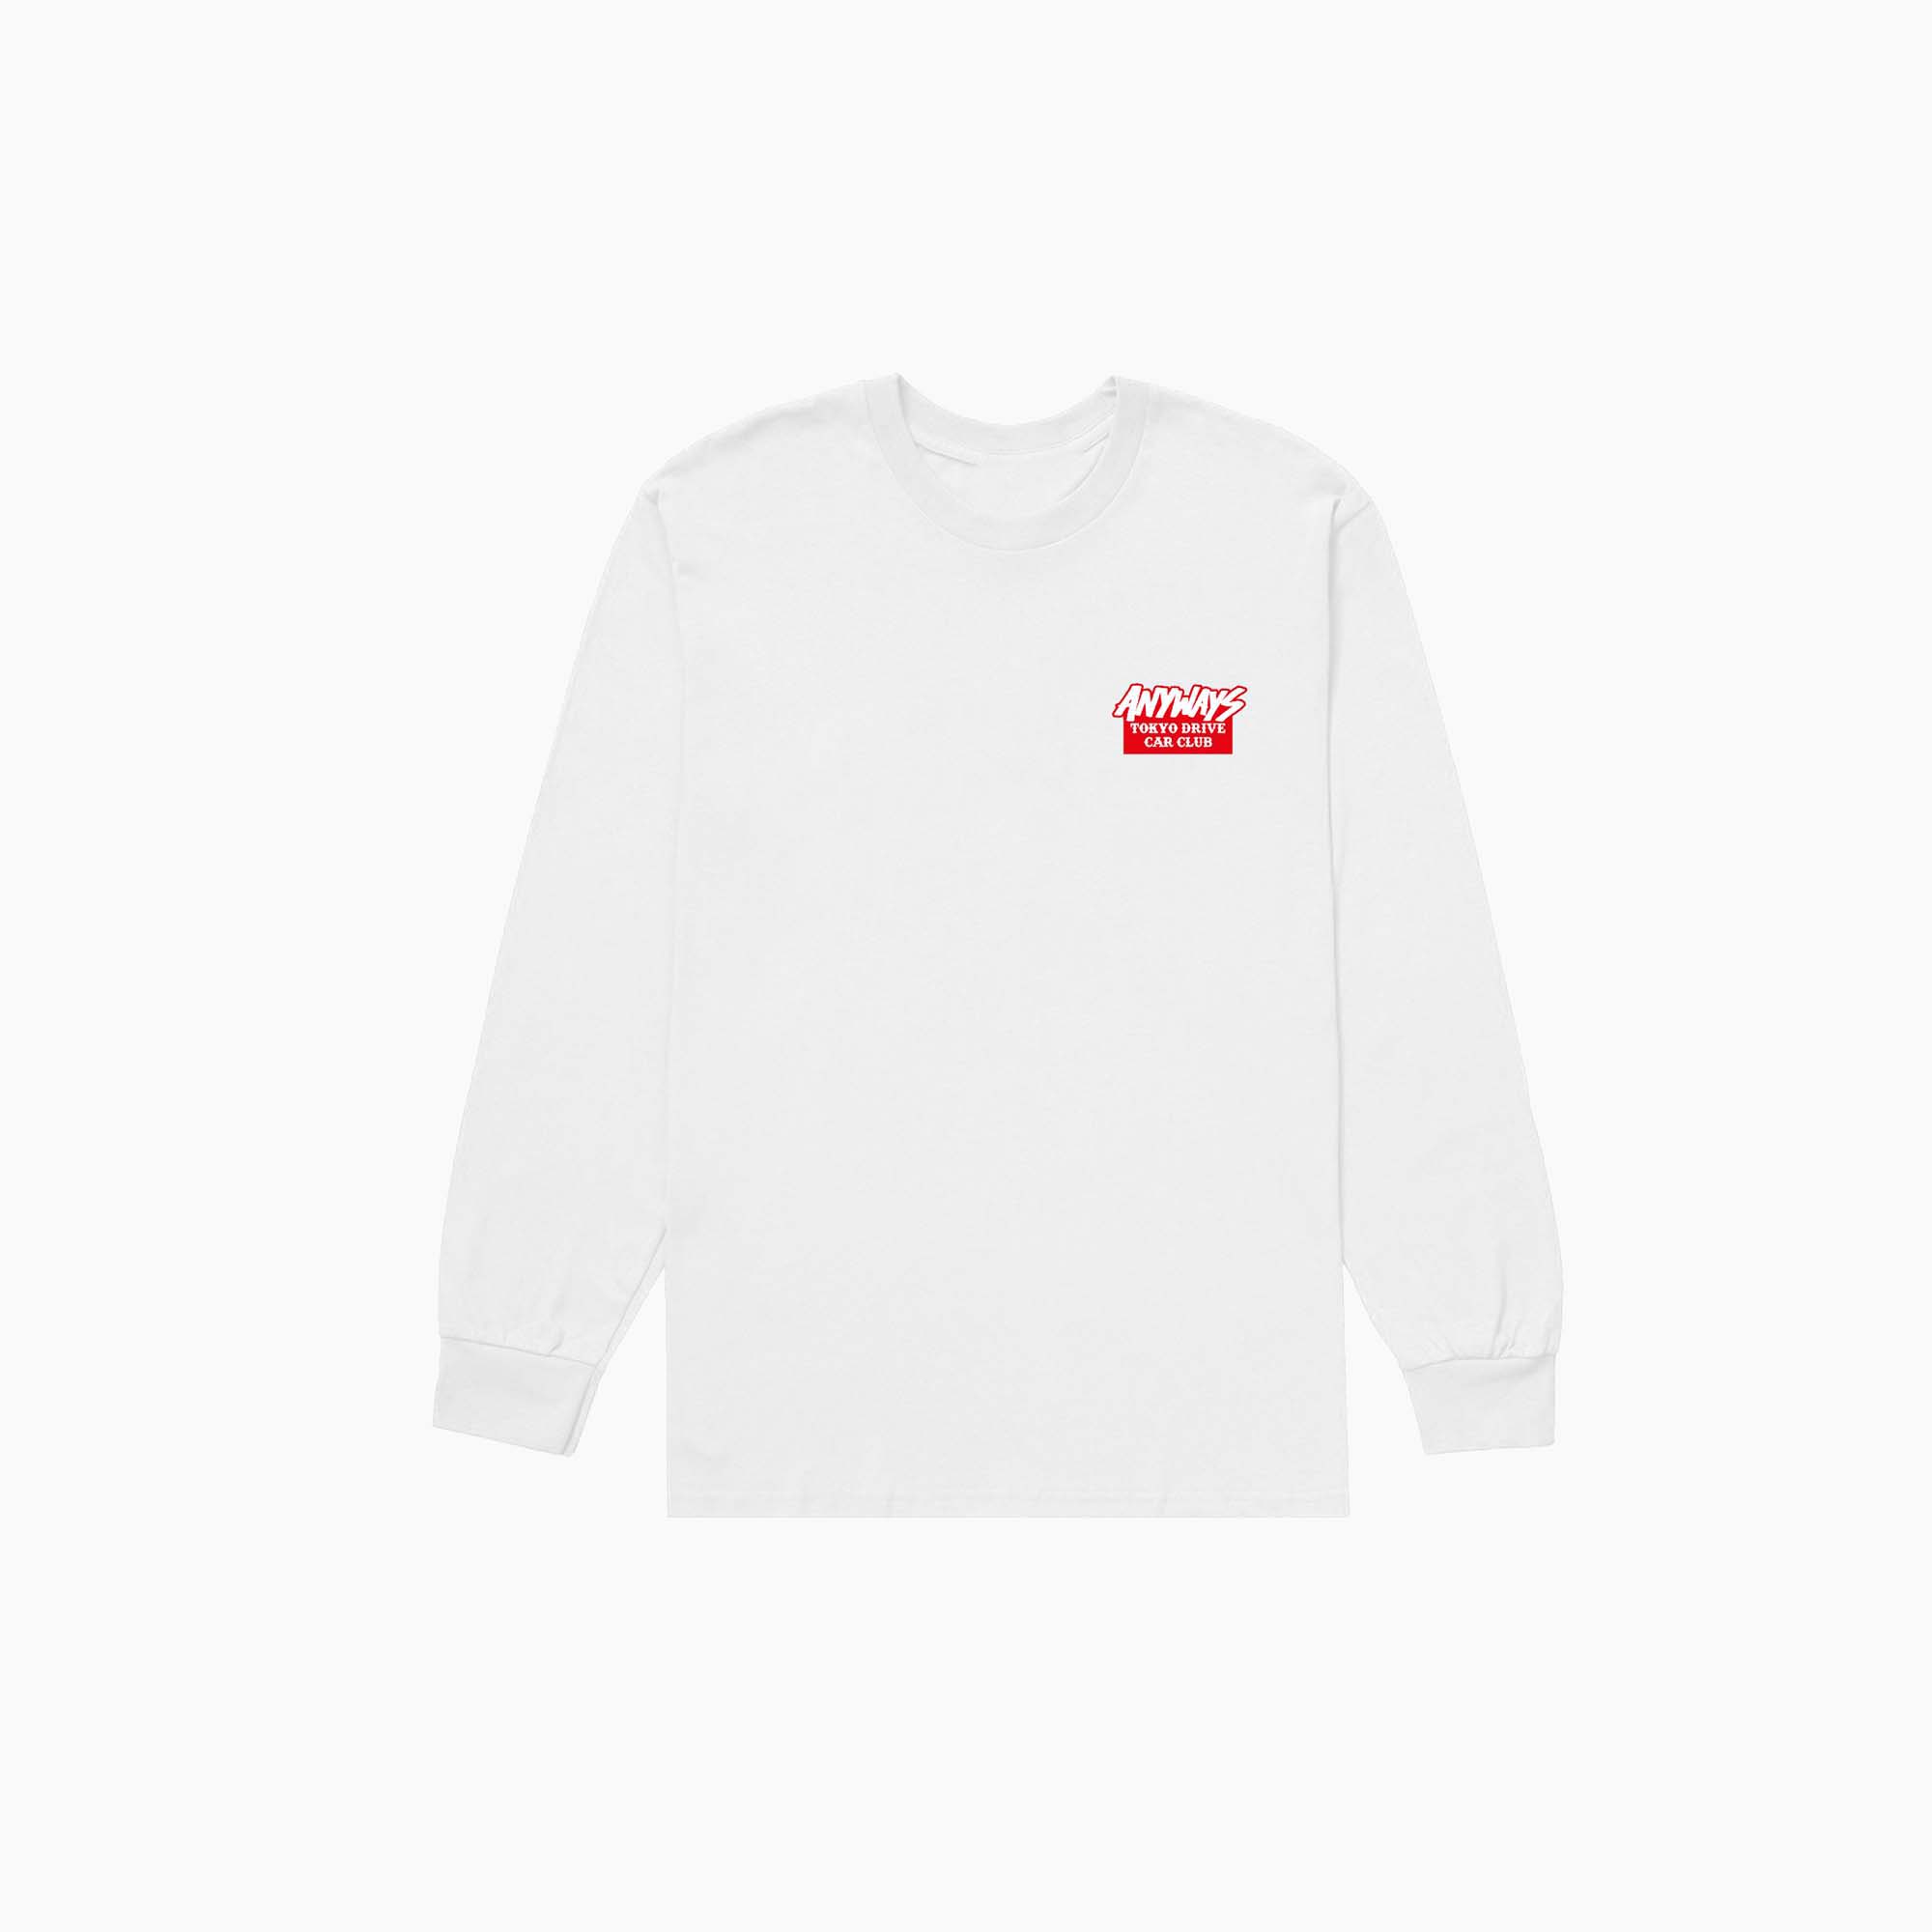 Anyways x Tokyo Drive Car Club | White Long Sleeve Tee-T-Shirt-Anyways-gpx-store